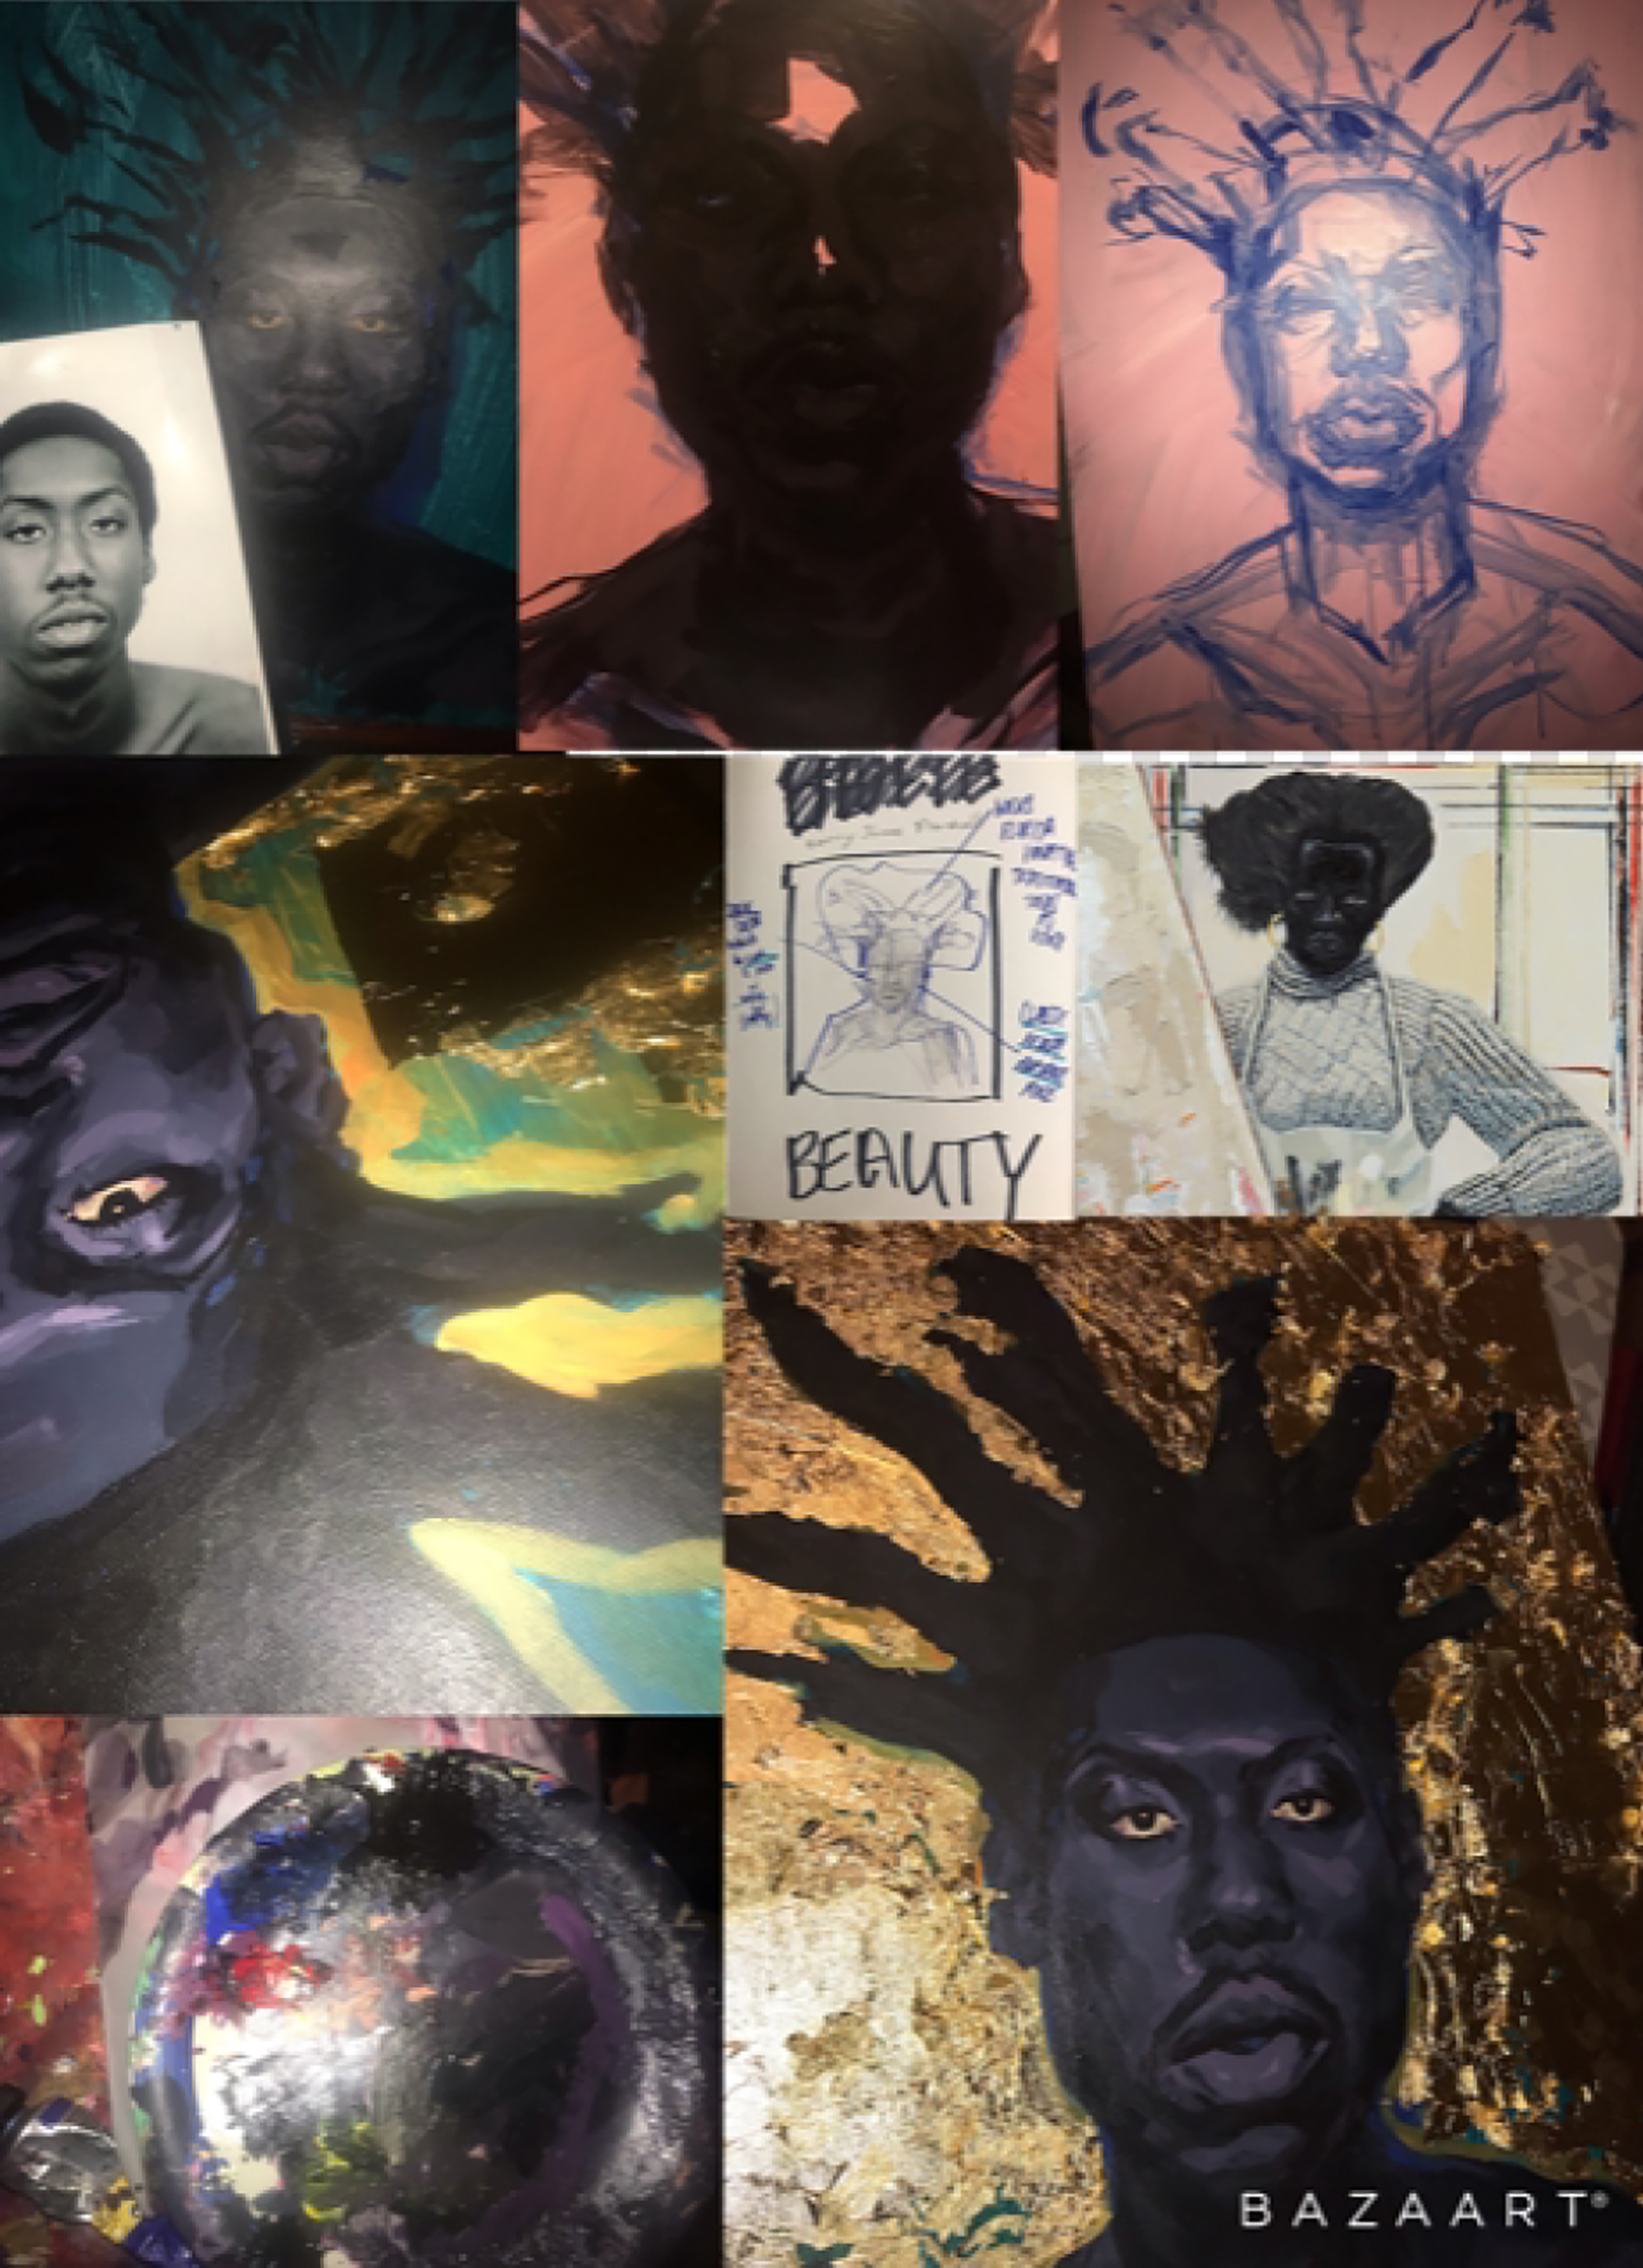 Collage of images and in-process art that documents how the artist created the illustration of the young black man with pointed hair